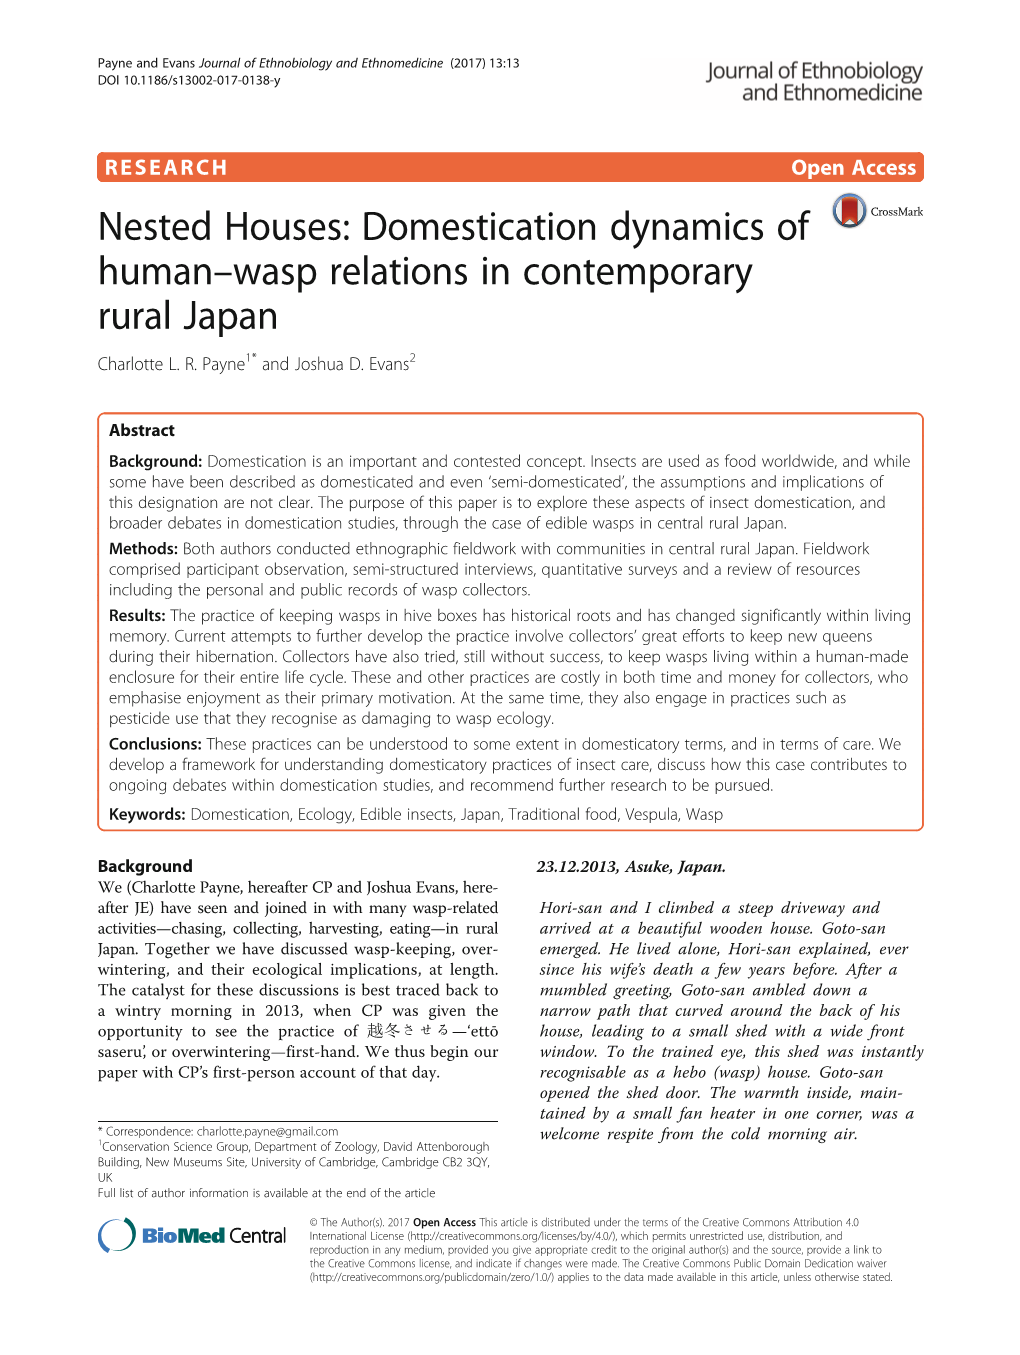 Domestication Dynamics of Human–Wasp Relations in Contemporary Rural Japan Charlotte L